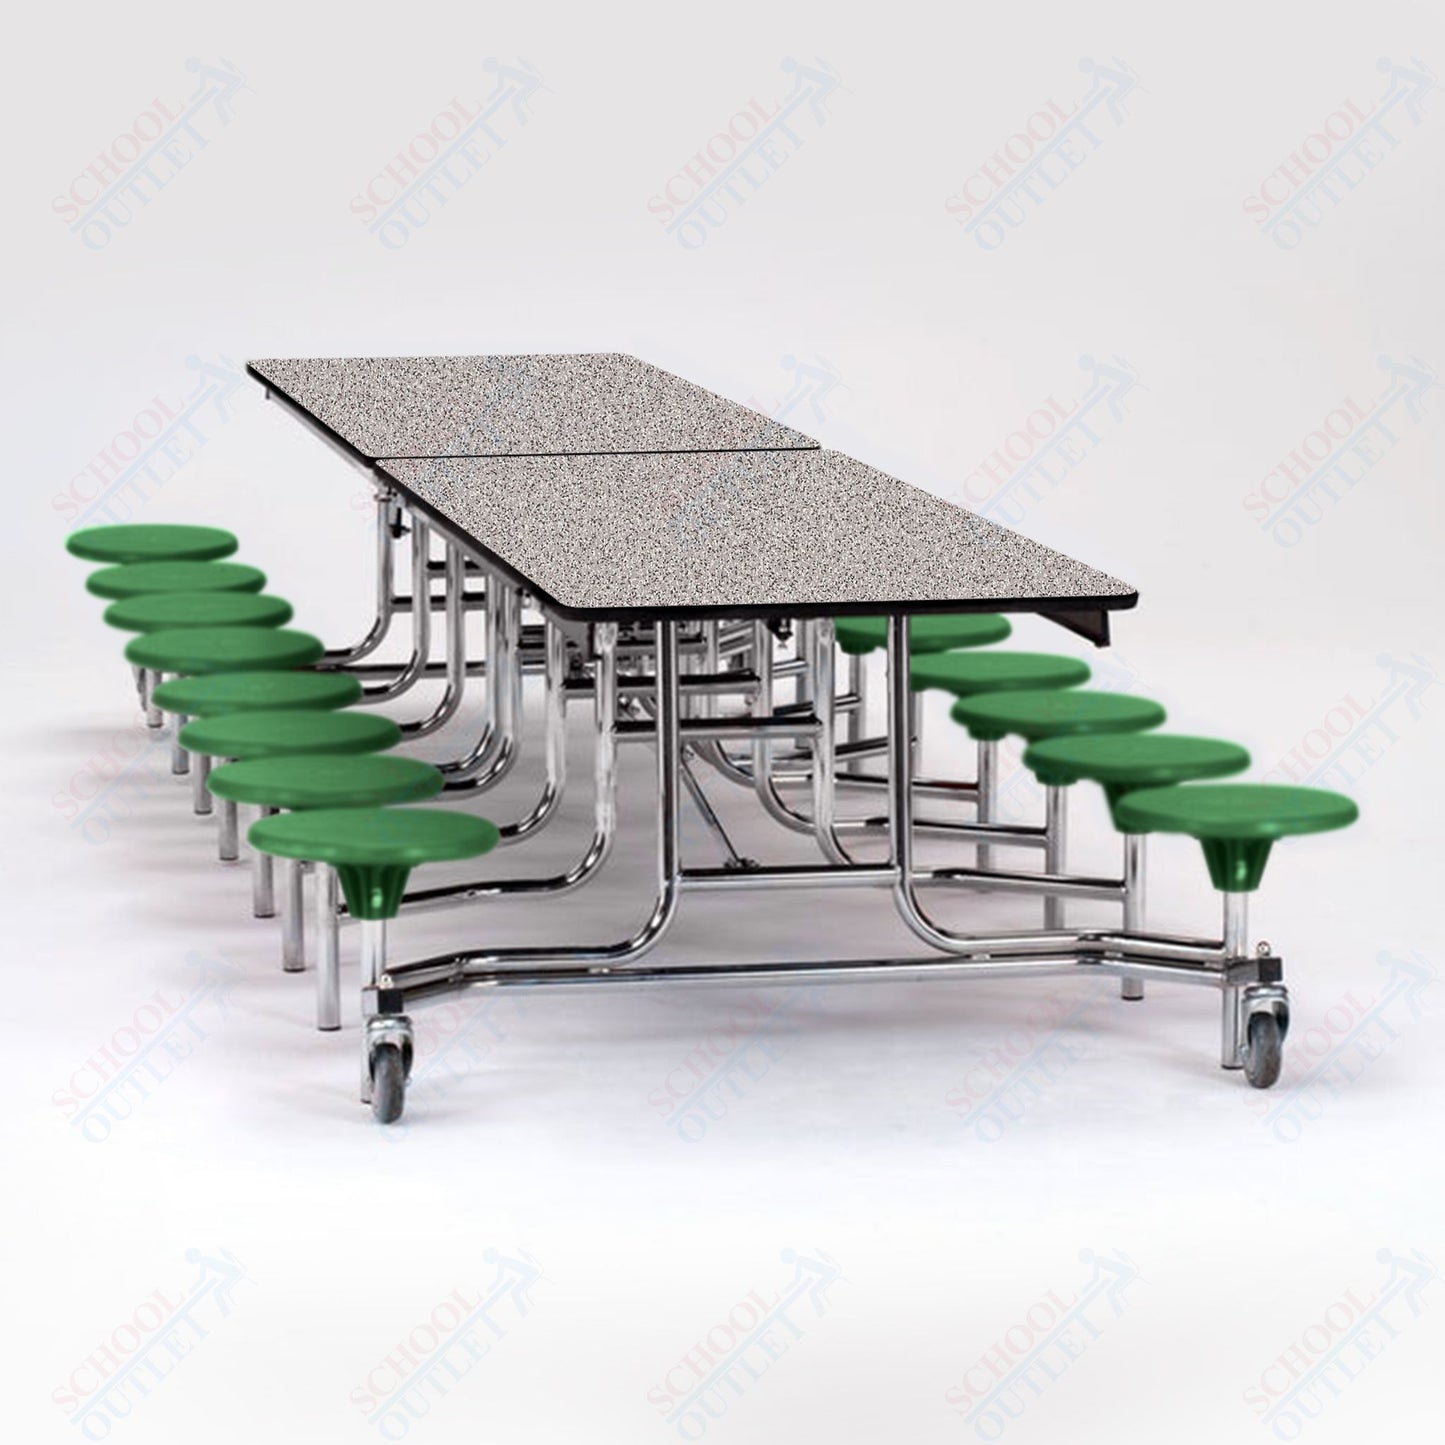 NPS Mobile Cafeteria Table - 30" W x 12' L - 16 Stools - Plywood Core - T-Molding Edge - Black Powdercoated Frame